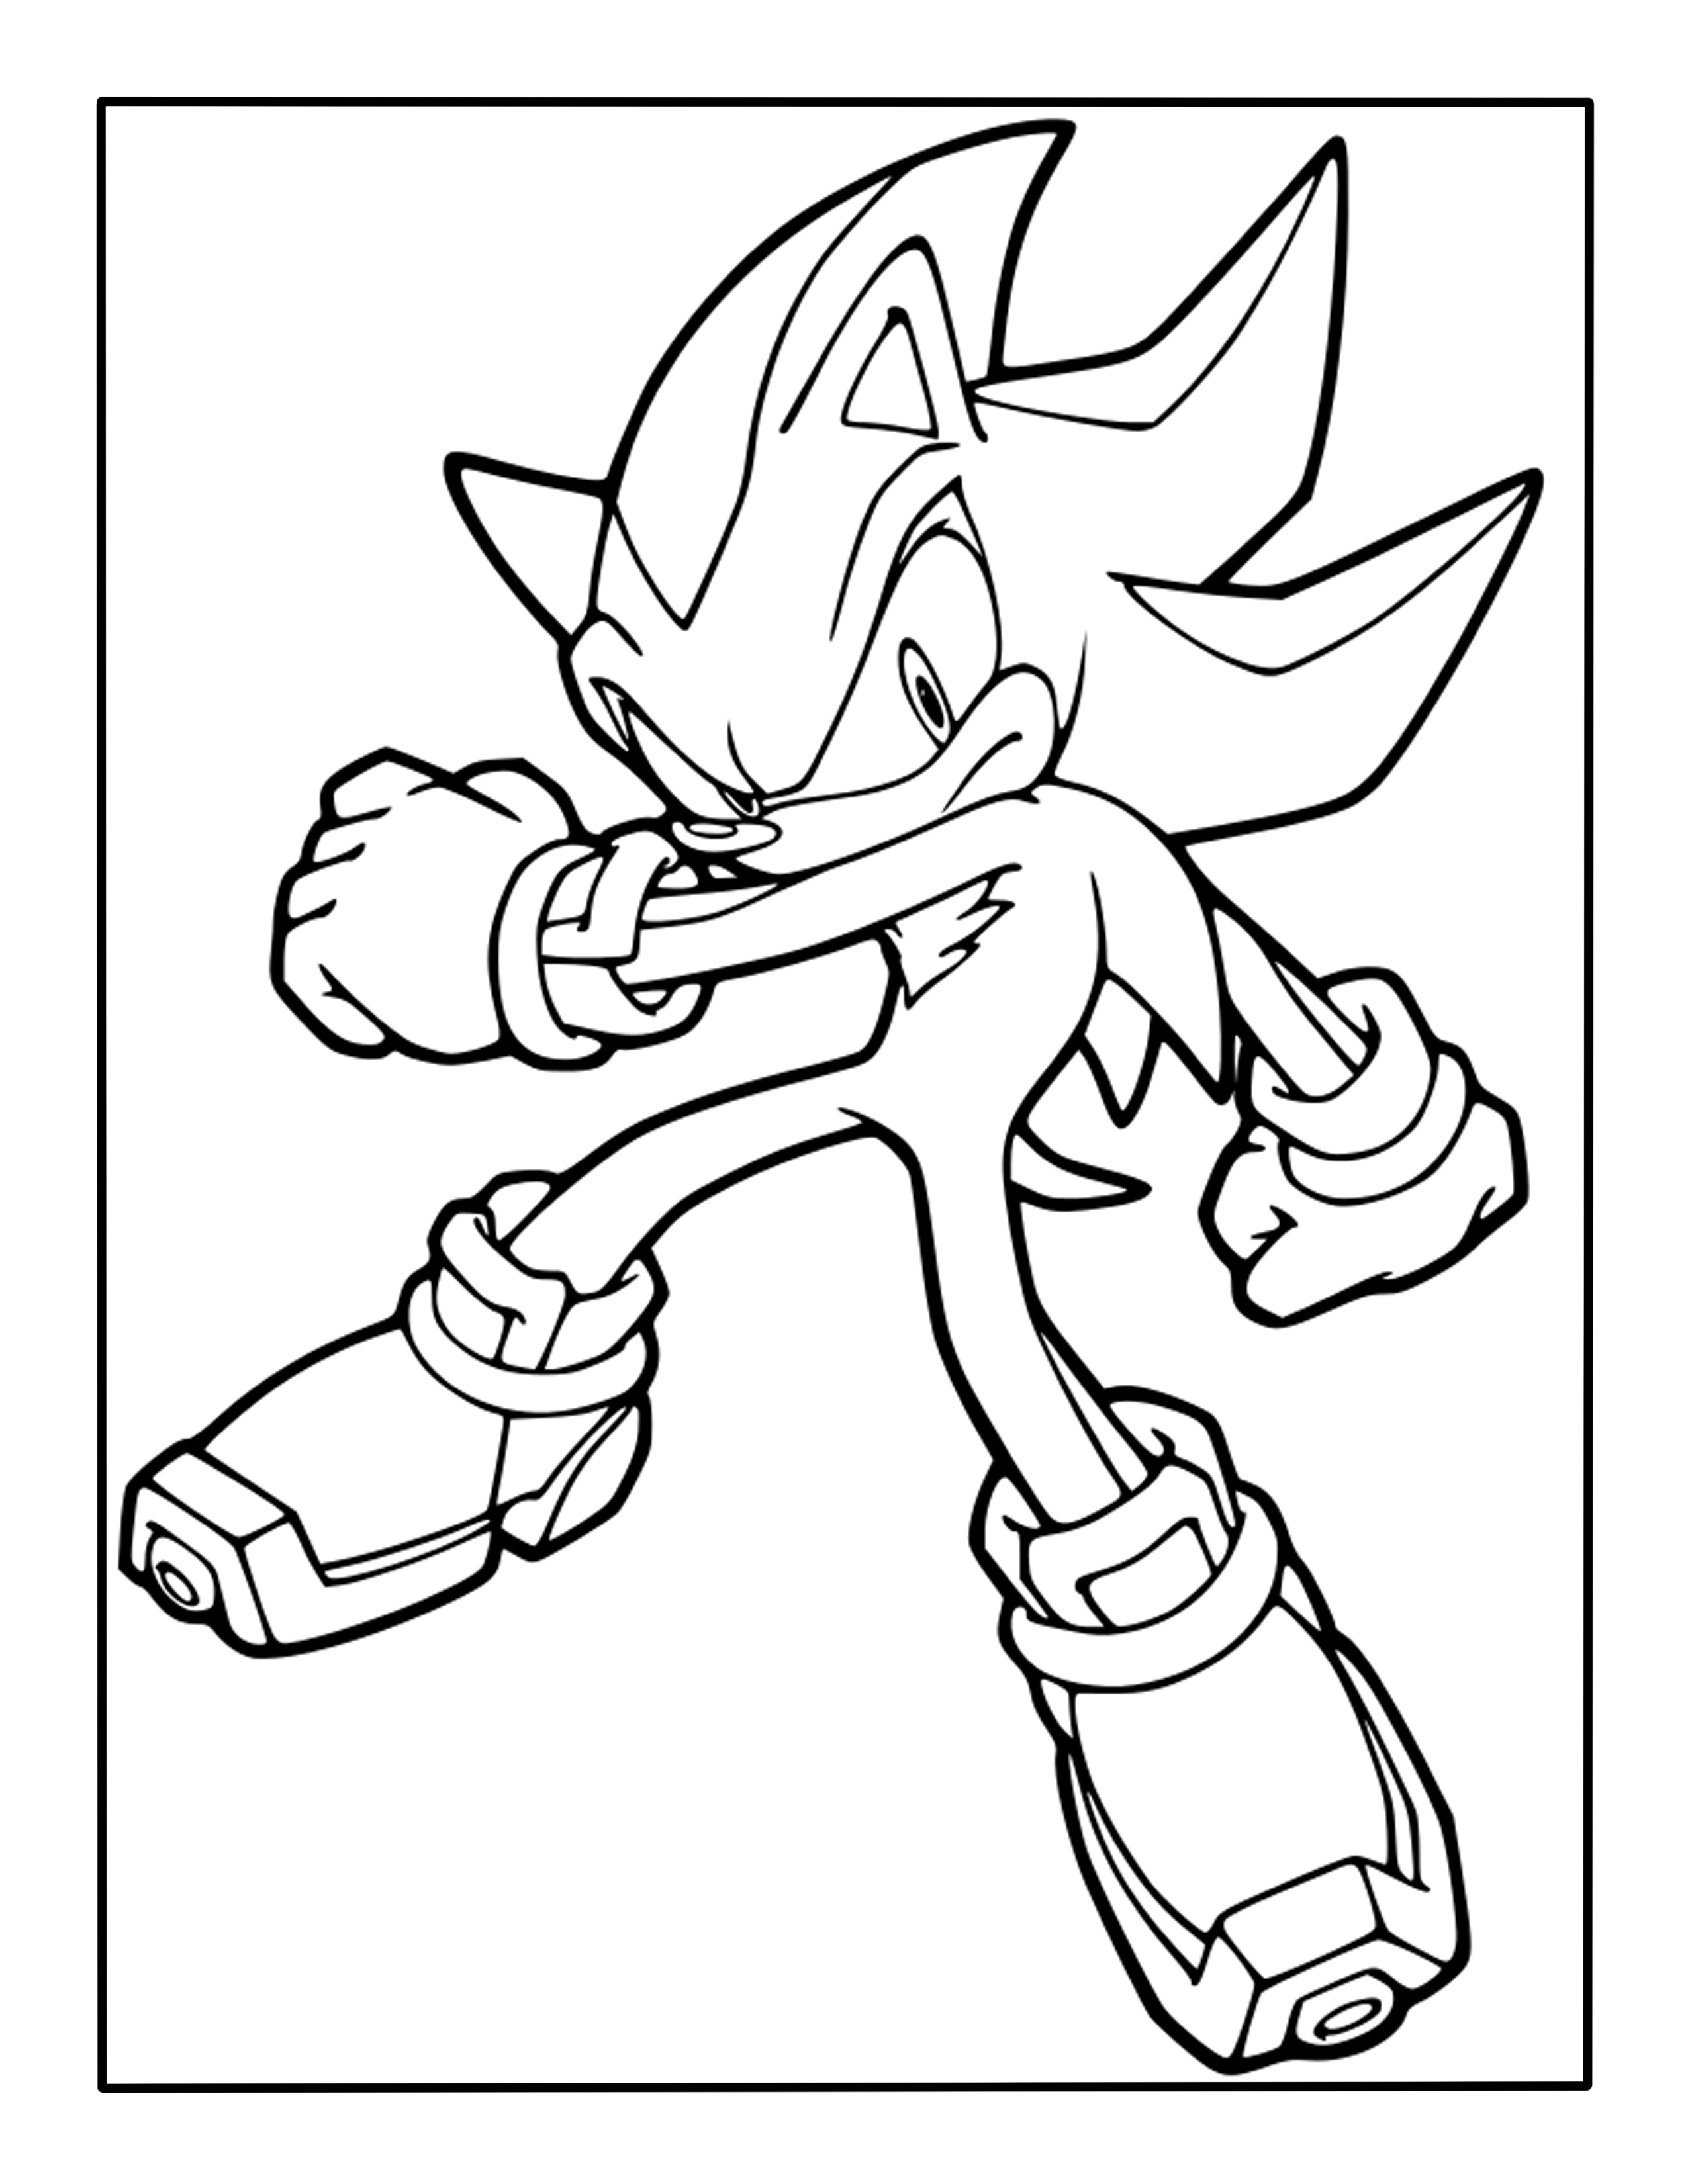 Coloring page - Shadow